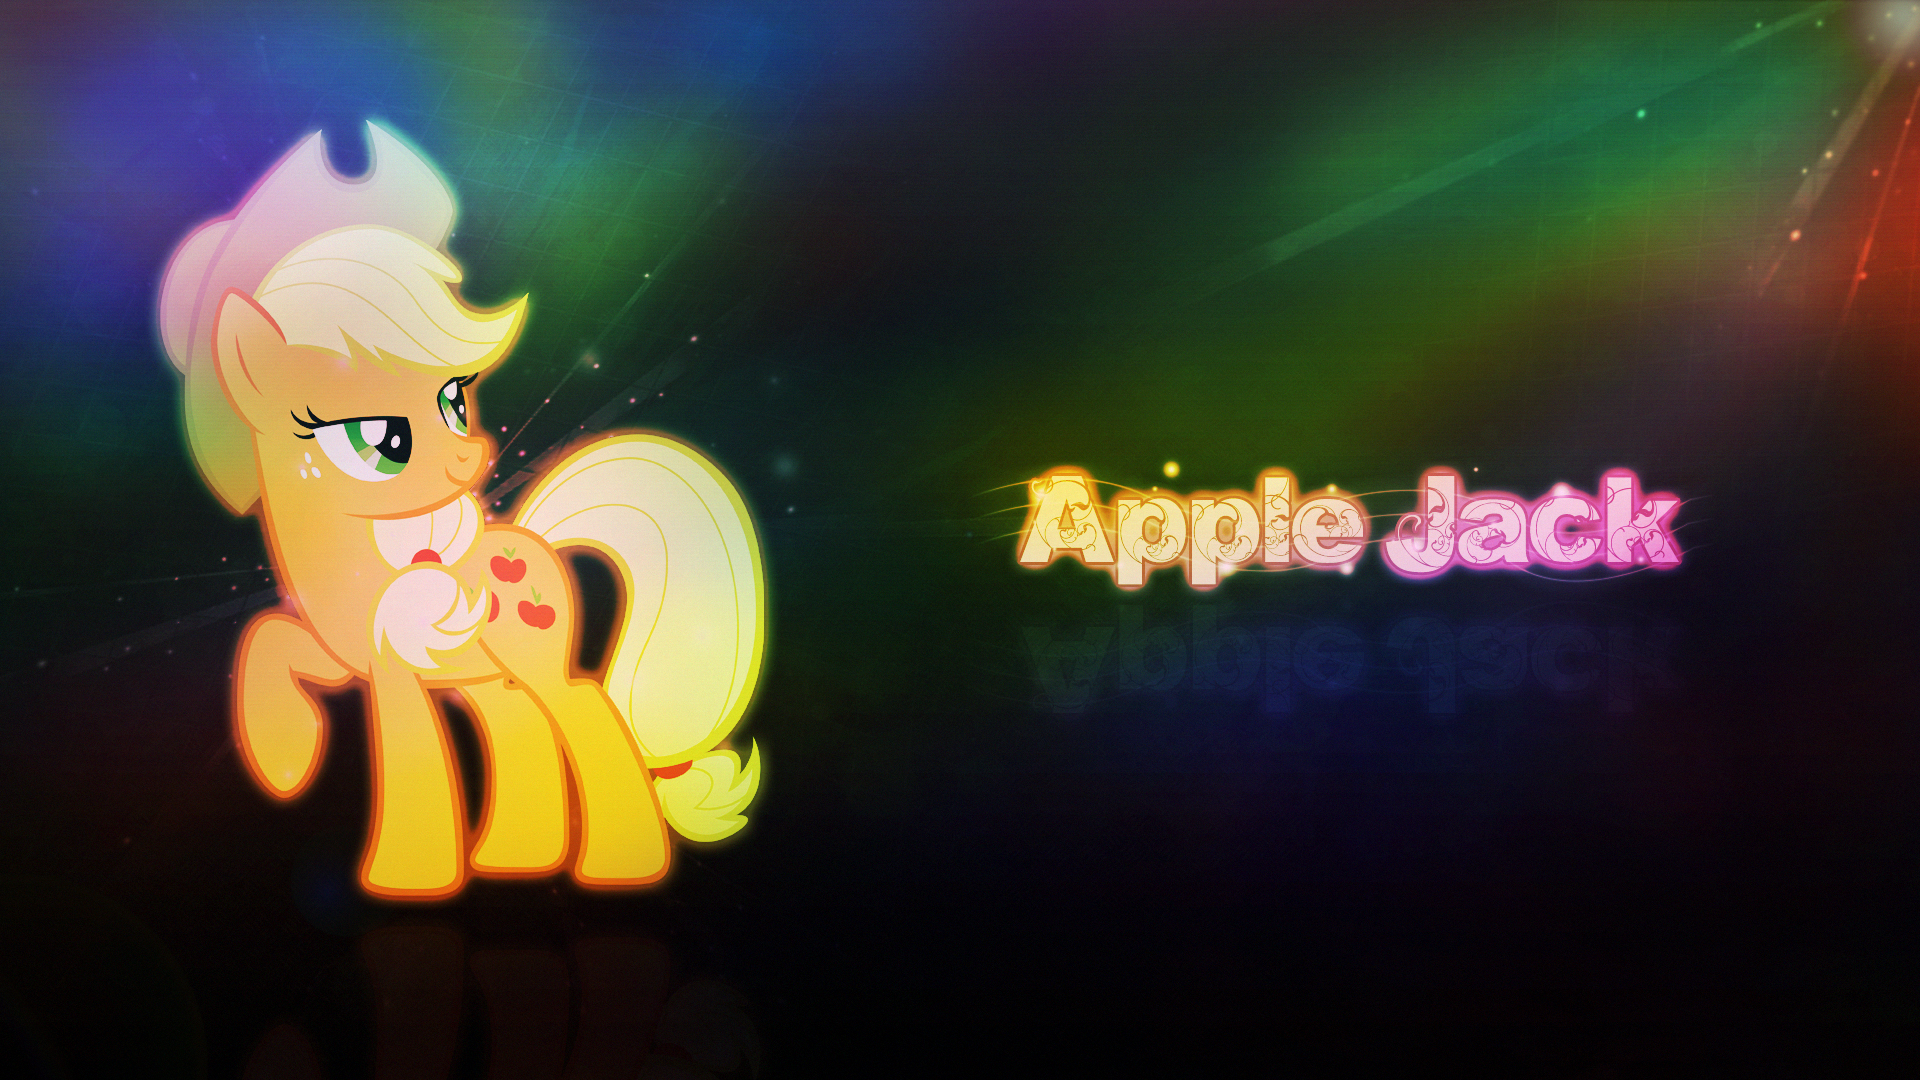 Wallaper - Apple Jack by Mackaged and mindnomad